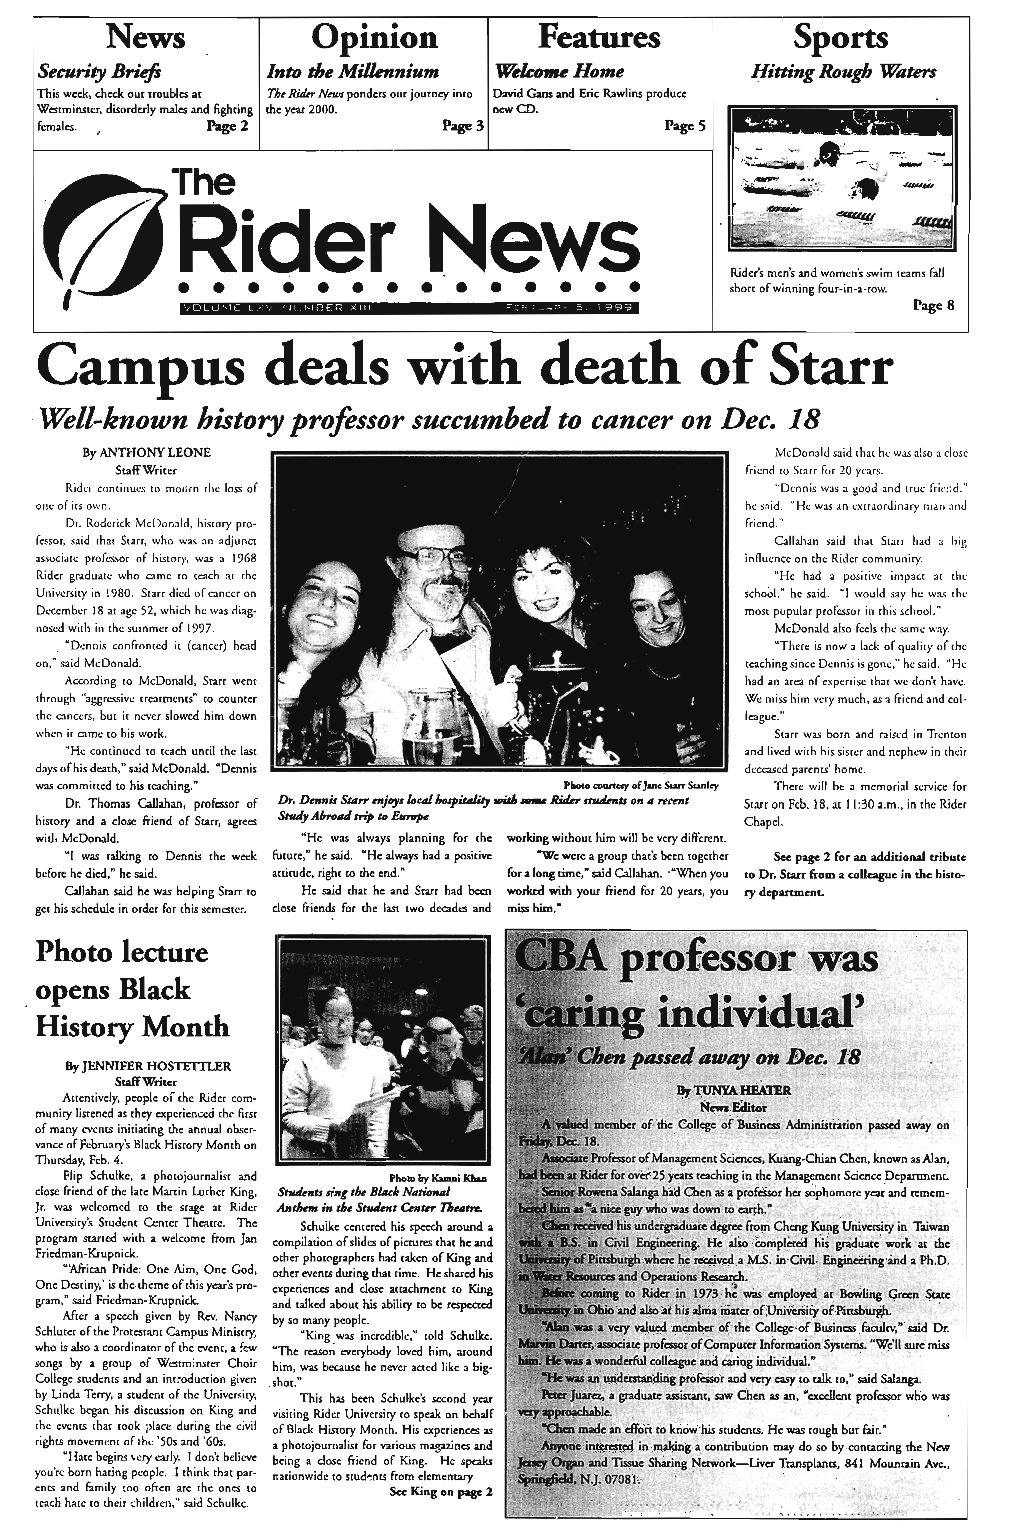 Campus Deals with Death of Starr .Well-Known History Professor Succumbed to Cancer on Dec